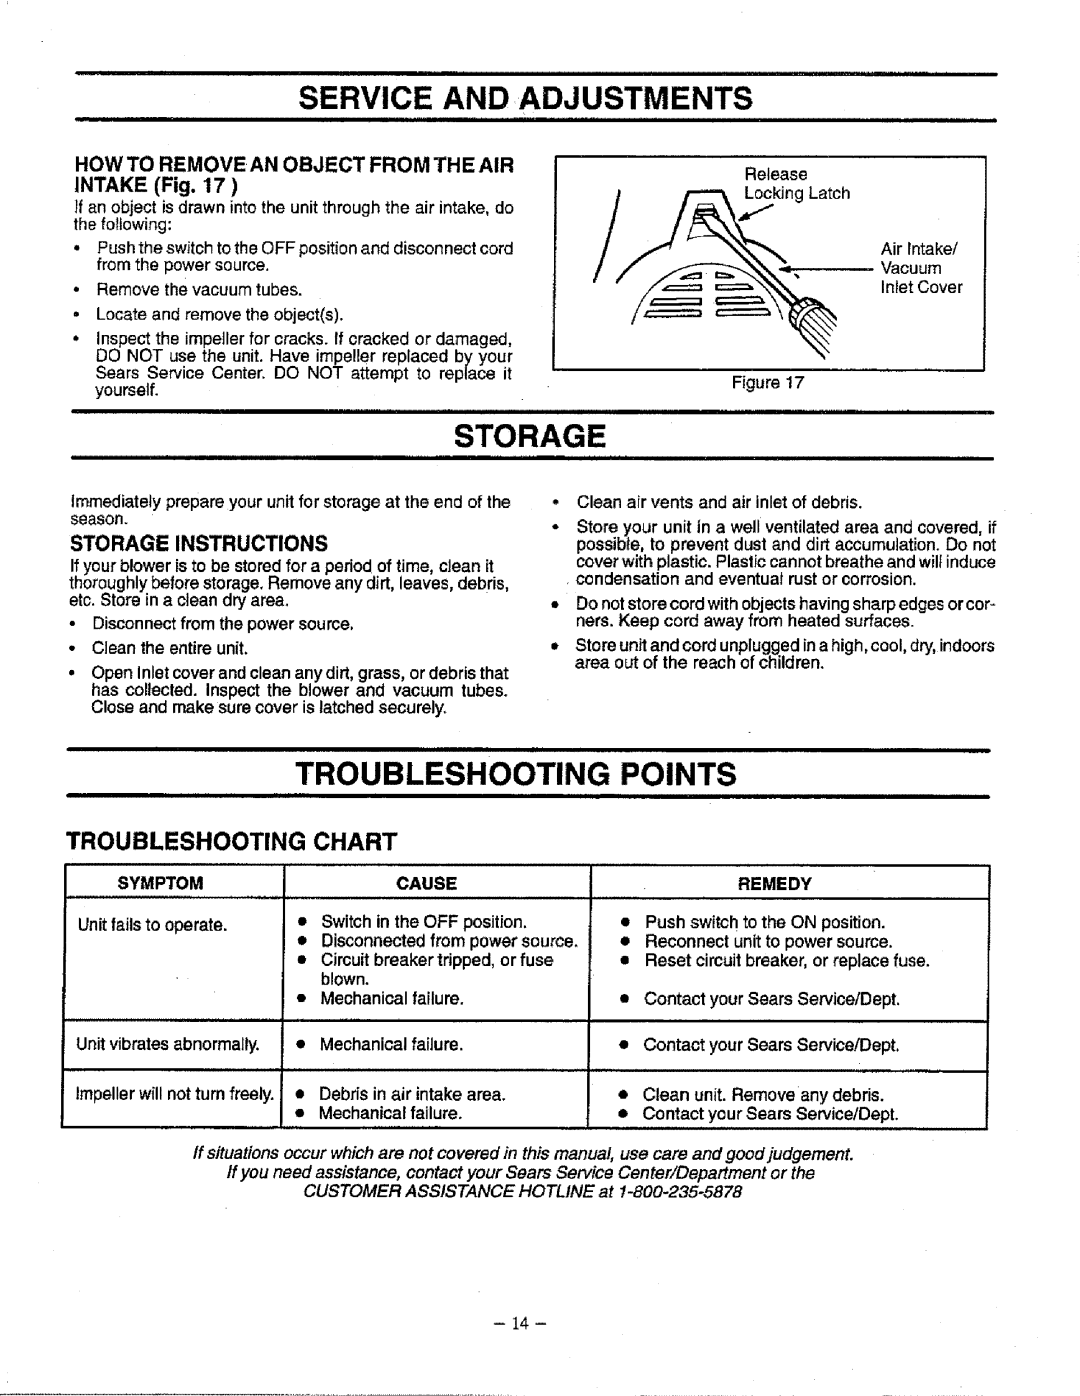 Craftsman 79834 manual Service And Adjustments, Troubleshooting Points, Troubleshooting Chart, Storage Instructions 